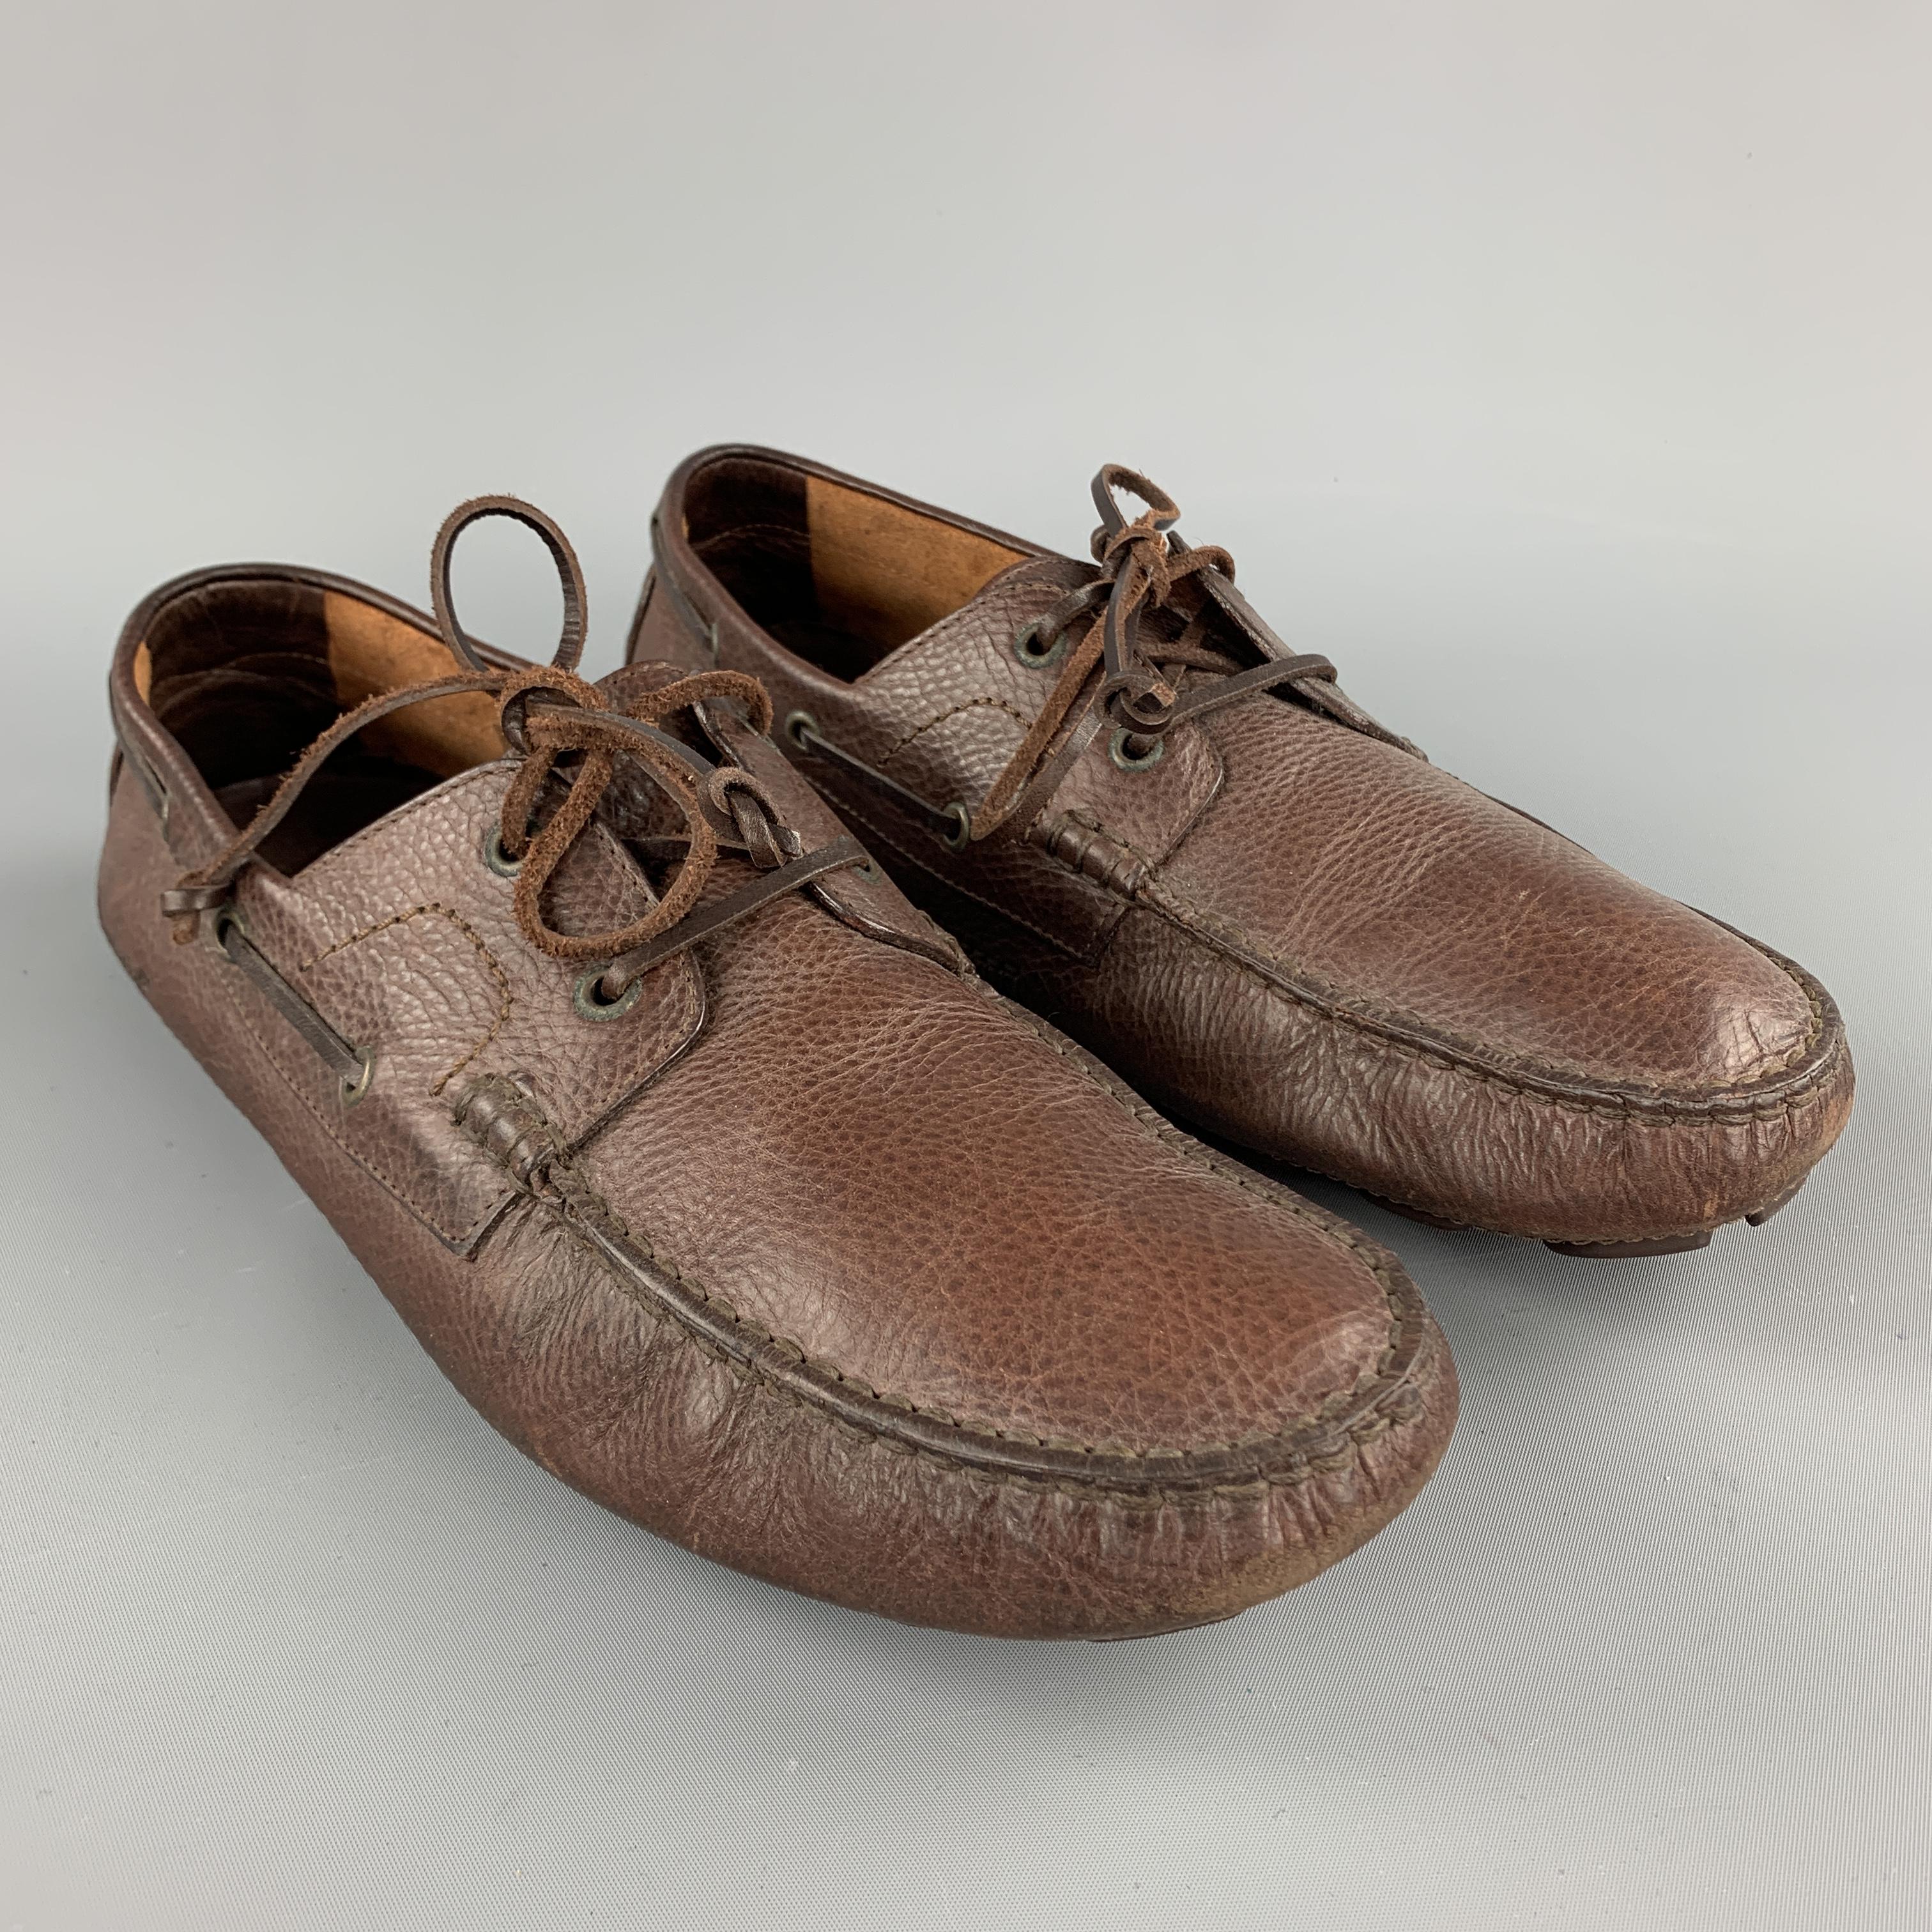 DSQUARED2 loafers come in brown leather with woven tie up front. Made in Italy.

Excellent Pre-Owned Condition.
Marked: IT 43

Outsole: 11.75 x 3.5 in.